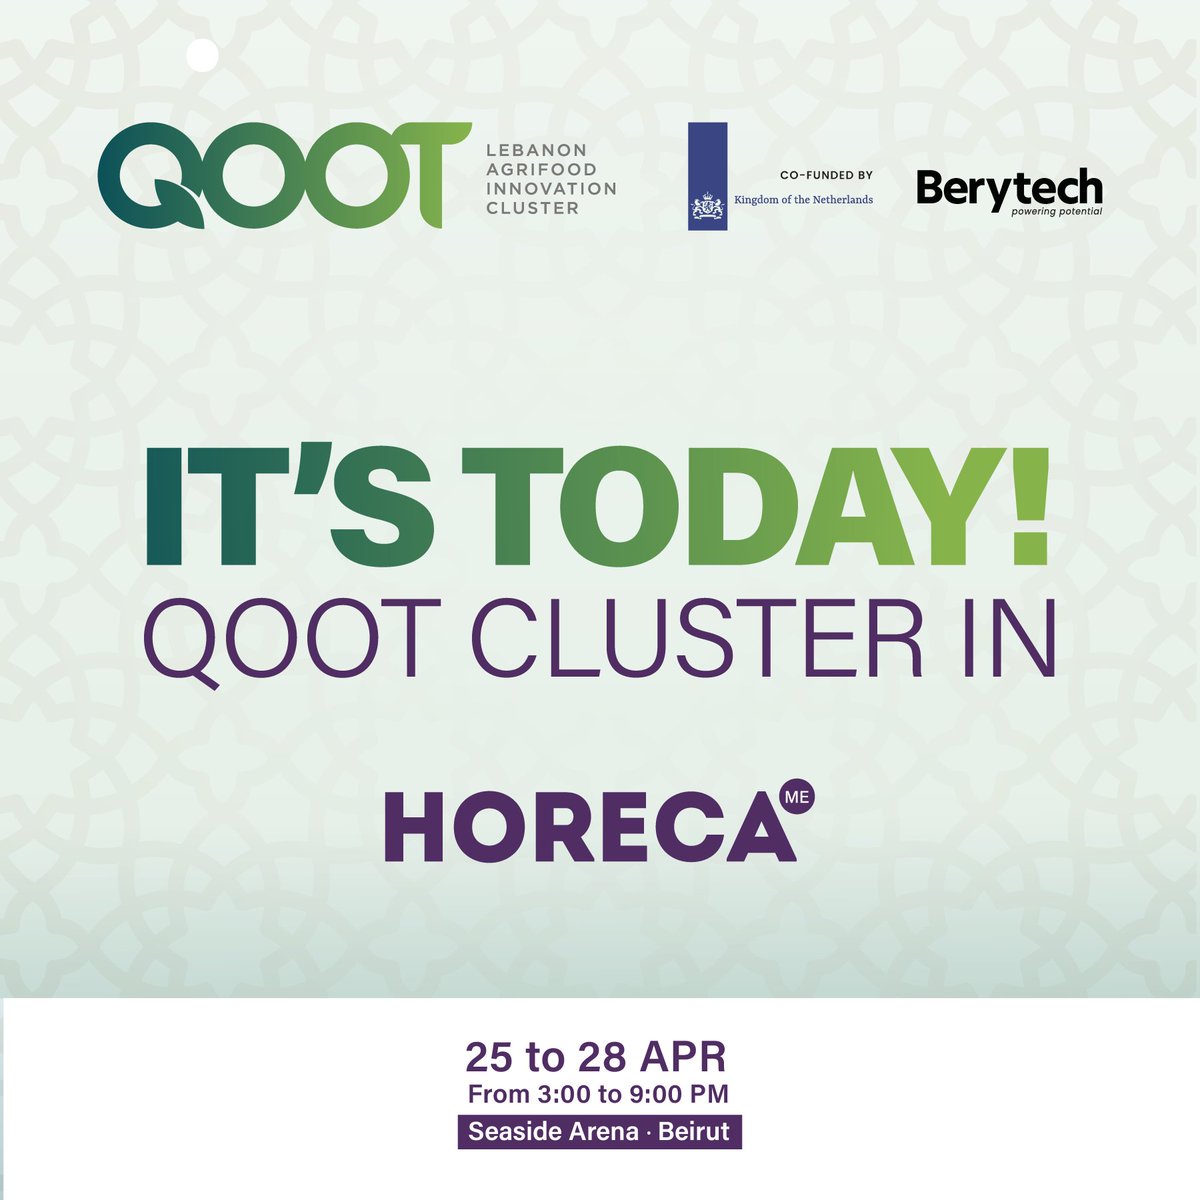 Starting today at 3 pm and for the next 3 days, QOOT will be hosting its members and their products at a dedicated space in HORECA. 
Join us April 25 – 28 from 3 to 9 pm at the Seaside Arena, Beirut.

qoot.org/qoot-cluster-s…

@HorecaConnects #HORECALebanon #QOOTinHORECA